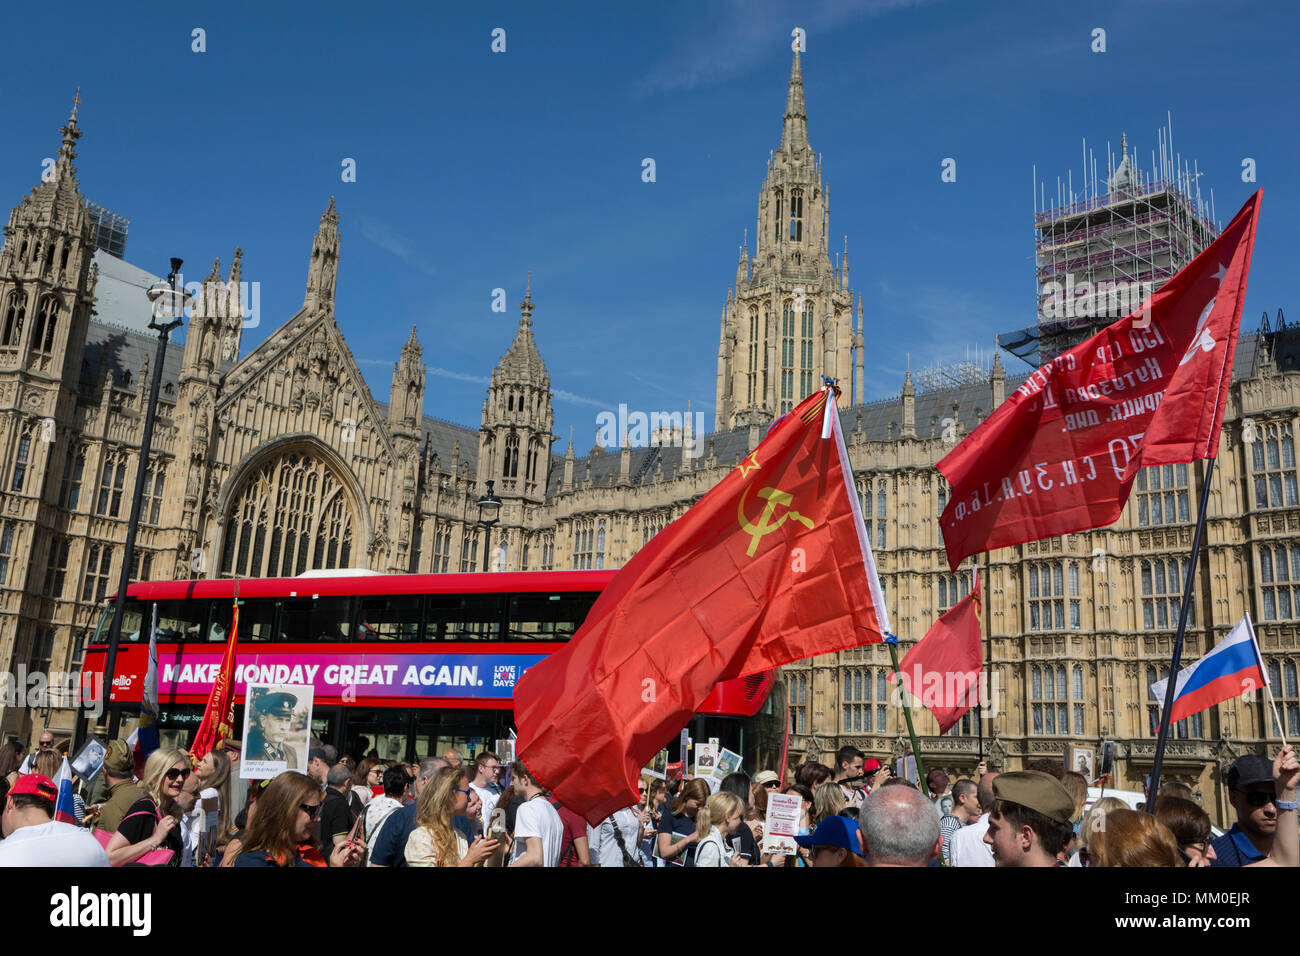 London, UK 9th May 2018: Russians and Russian-speakers from around the Russian Federation and former Soviet states (such as the Baltics) and of all generations, celebrate Victory Day, the annual commemoration remembering the sacrifice of Red Army heroes who defeated facism during WW2 - marching through the heart of British government in Whitehall, Parliament Square and ending outside Parliament itself. (Photo by Richard Baker / Alamy Live News) Stock Photo